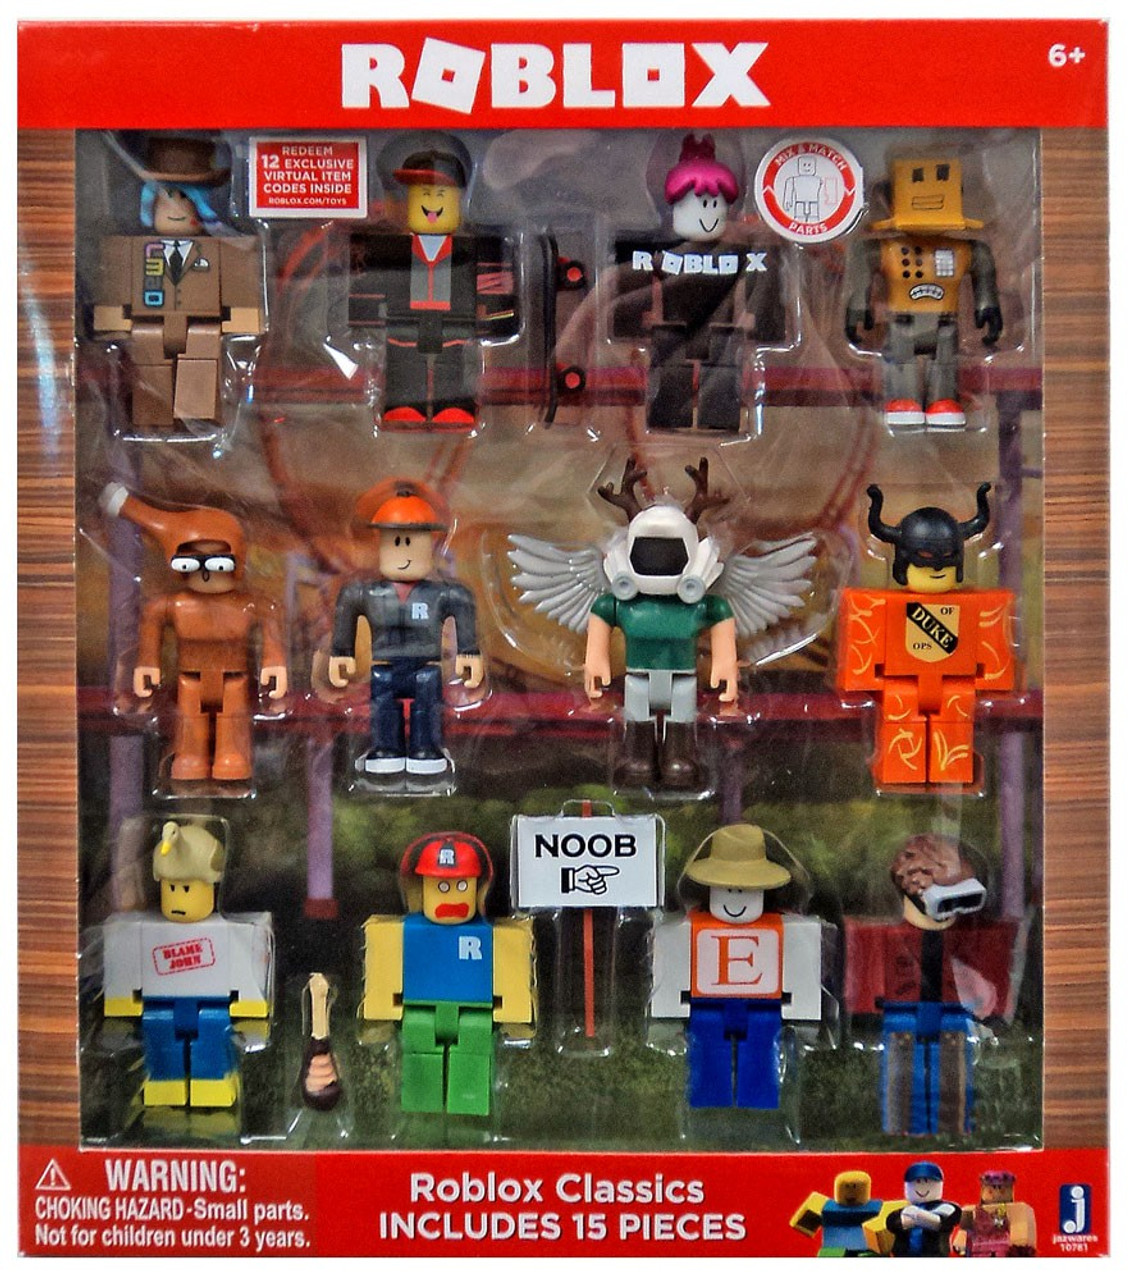 Roblox Series 1 Roblox Classics Exclusive 3 Action Figure 12 Pack Includes 12 Online Item Codes Jazwares Toywiz - roblox classic